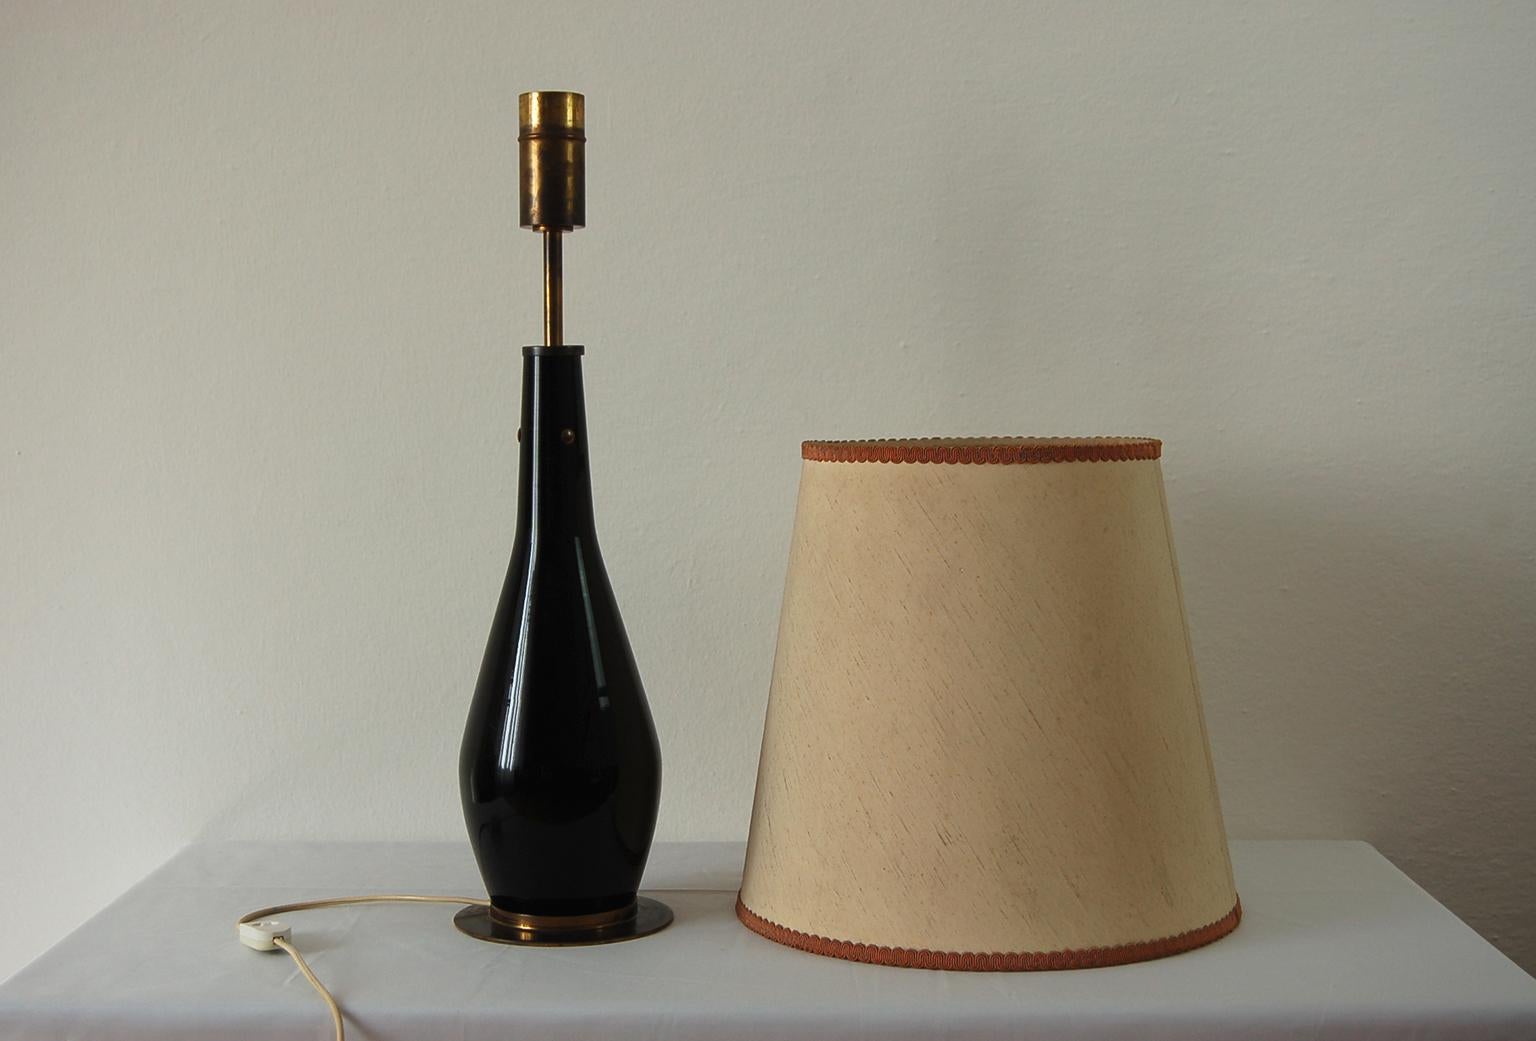 Other Midcentury Table Lamp in Black Glass and Fabric Lampshade by Stilnovo, 1950s For Sale